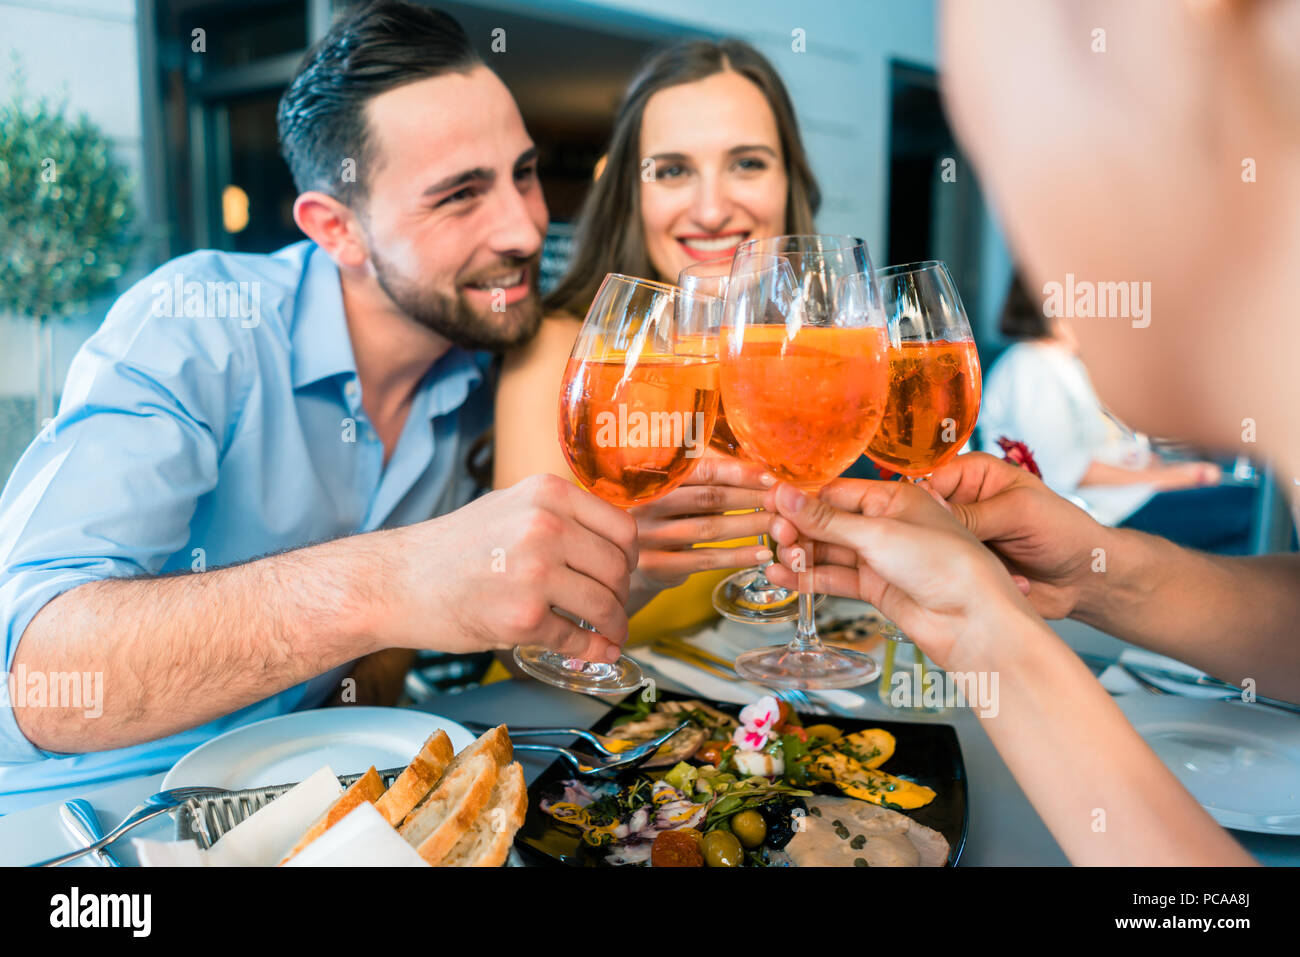 Handsome young man sitting next to his girlfriend while toasting Stock Photo